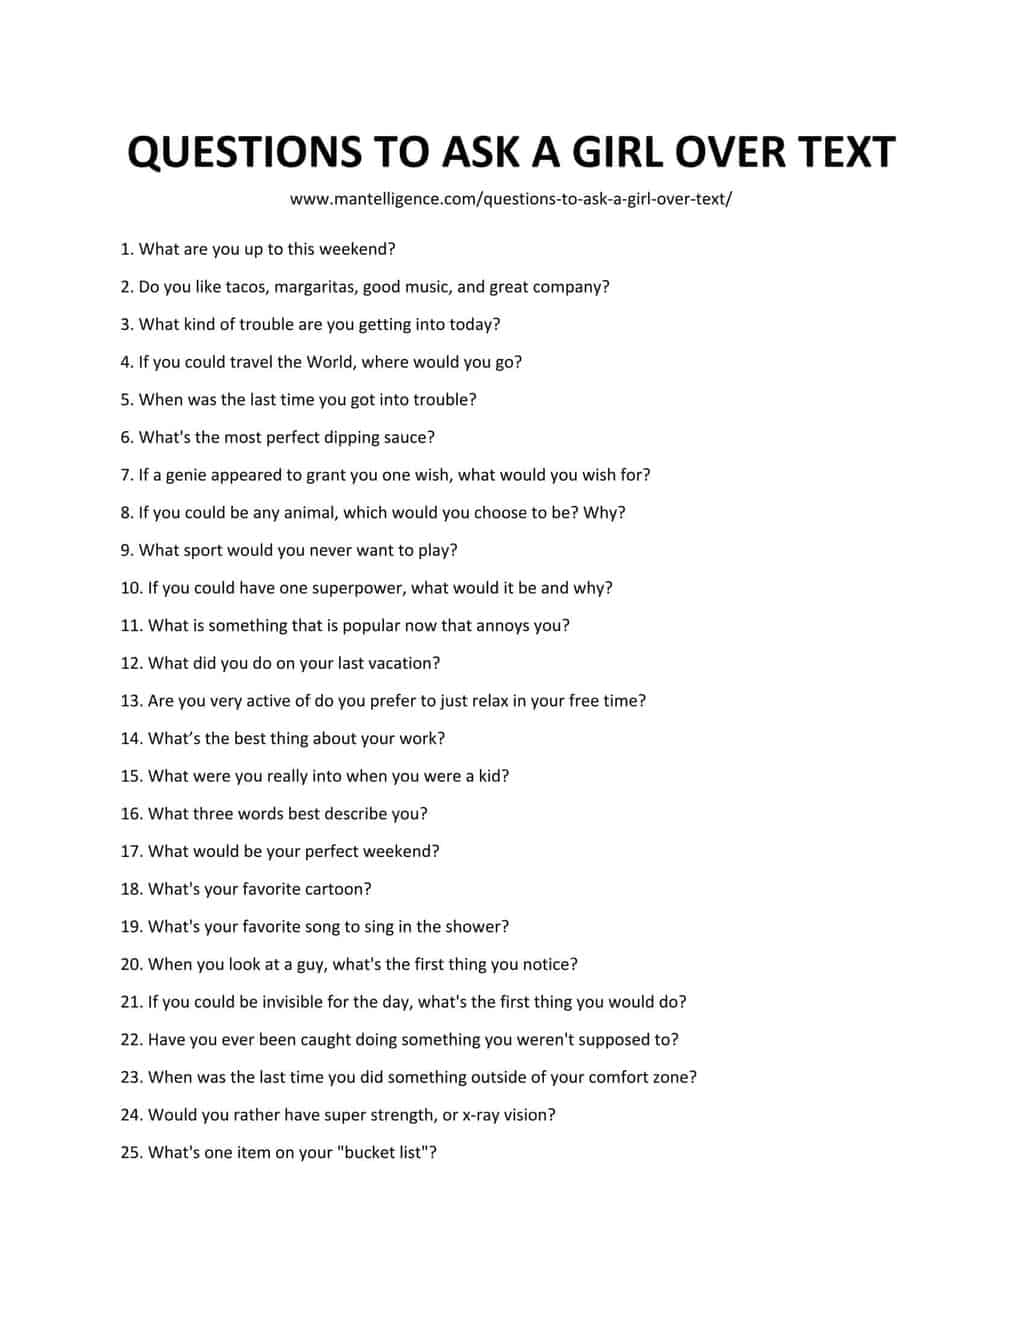 Flirty Questions To Ask A Girl Over Text